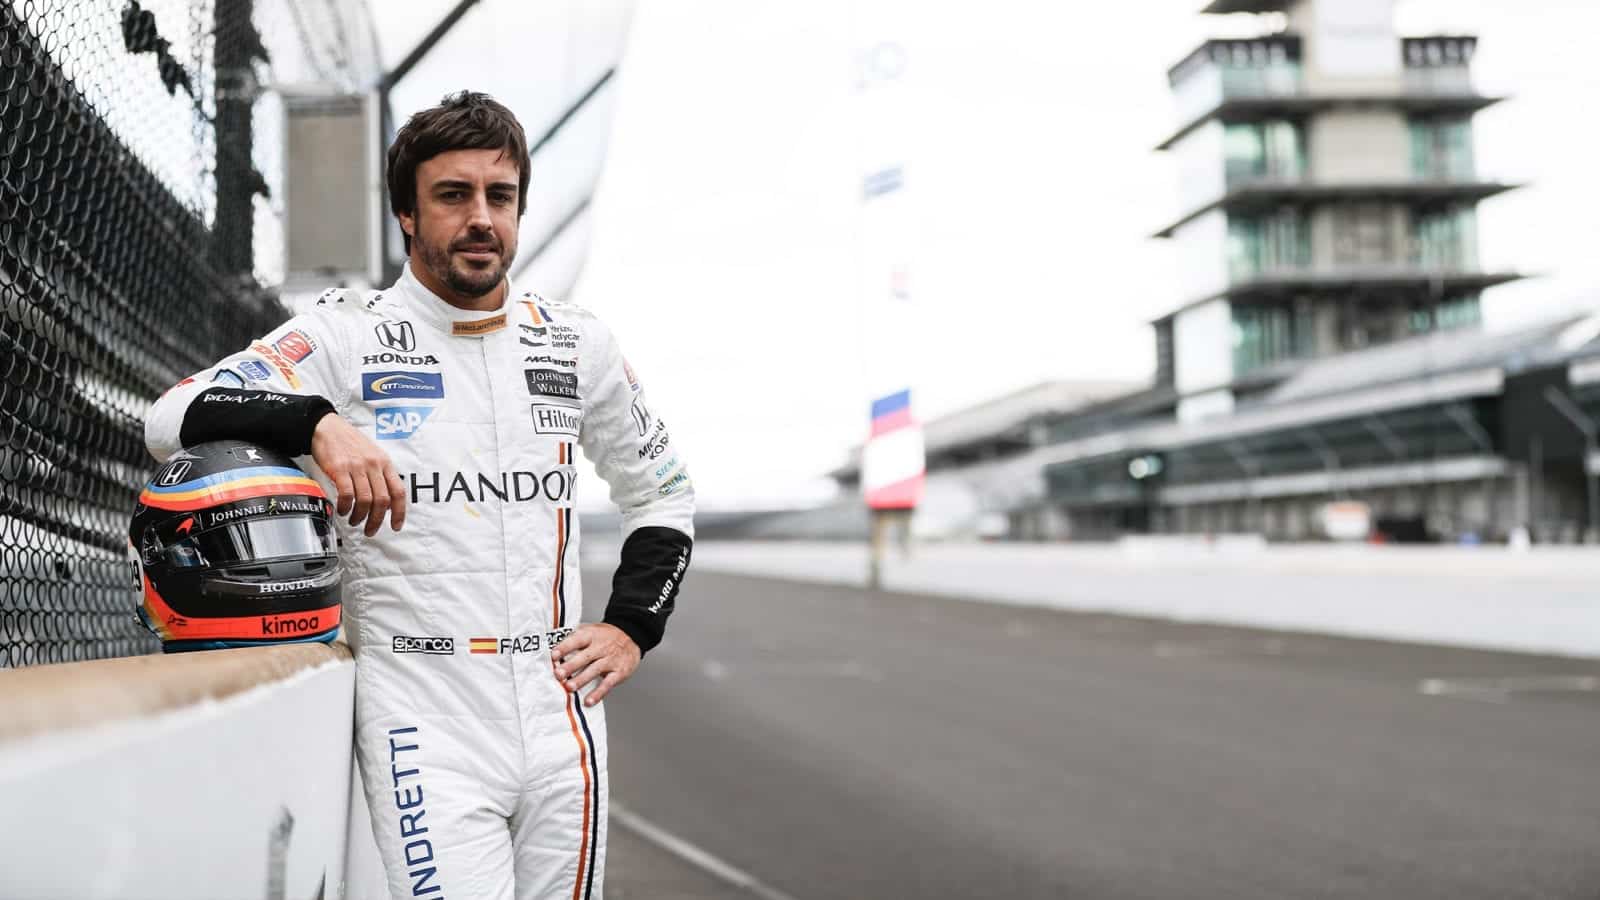 Fernando Alonso at the Indianapolis Motor Speedway ahead of the 2017 Indy 500 with Andretti Autosport